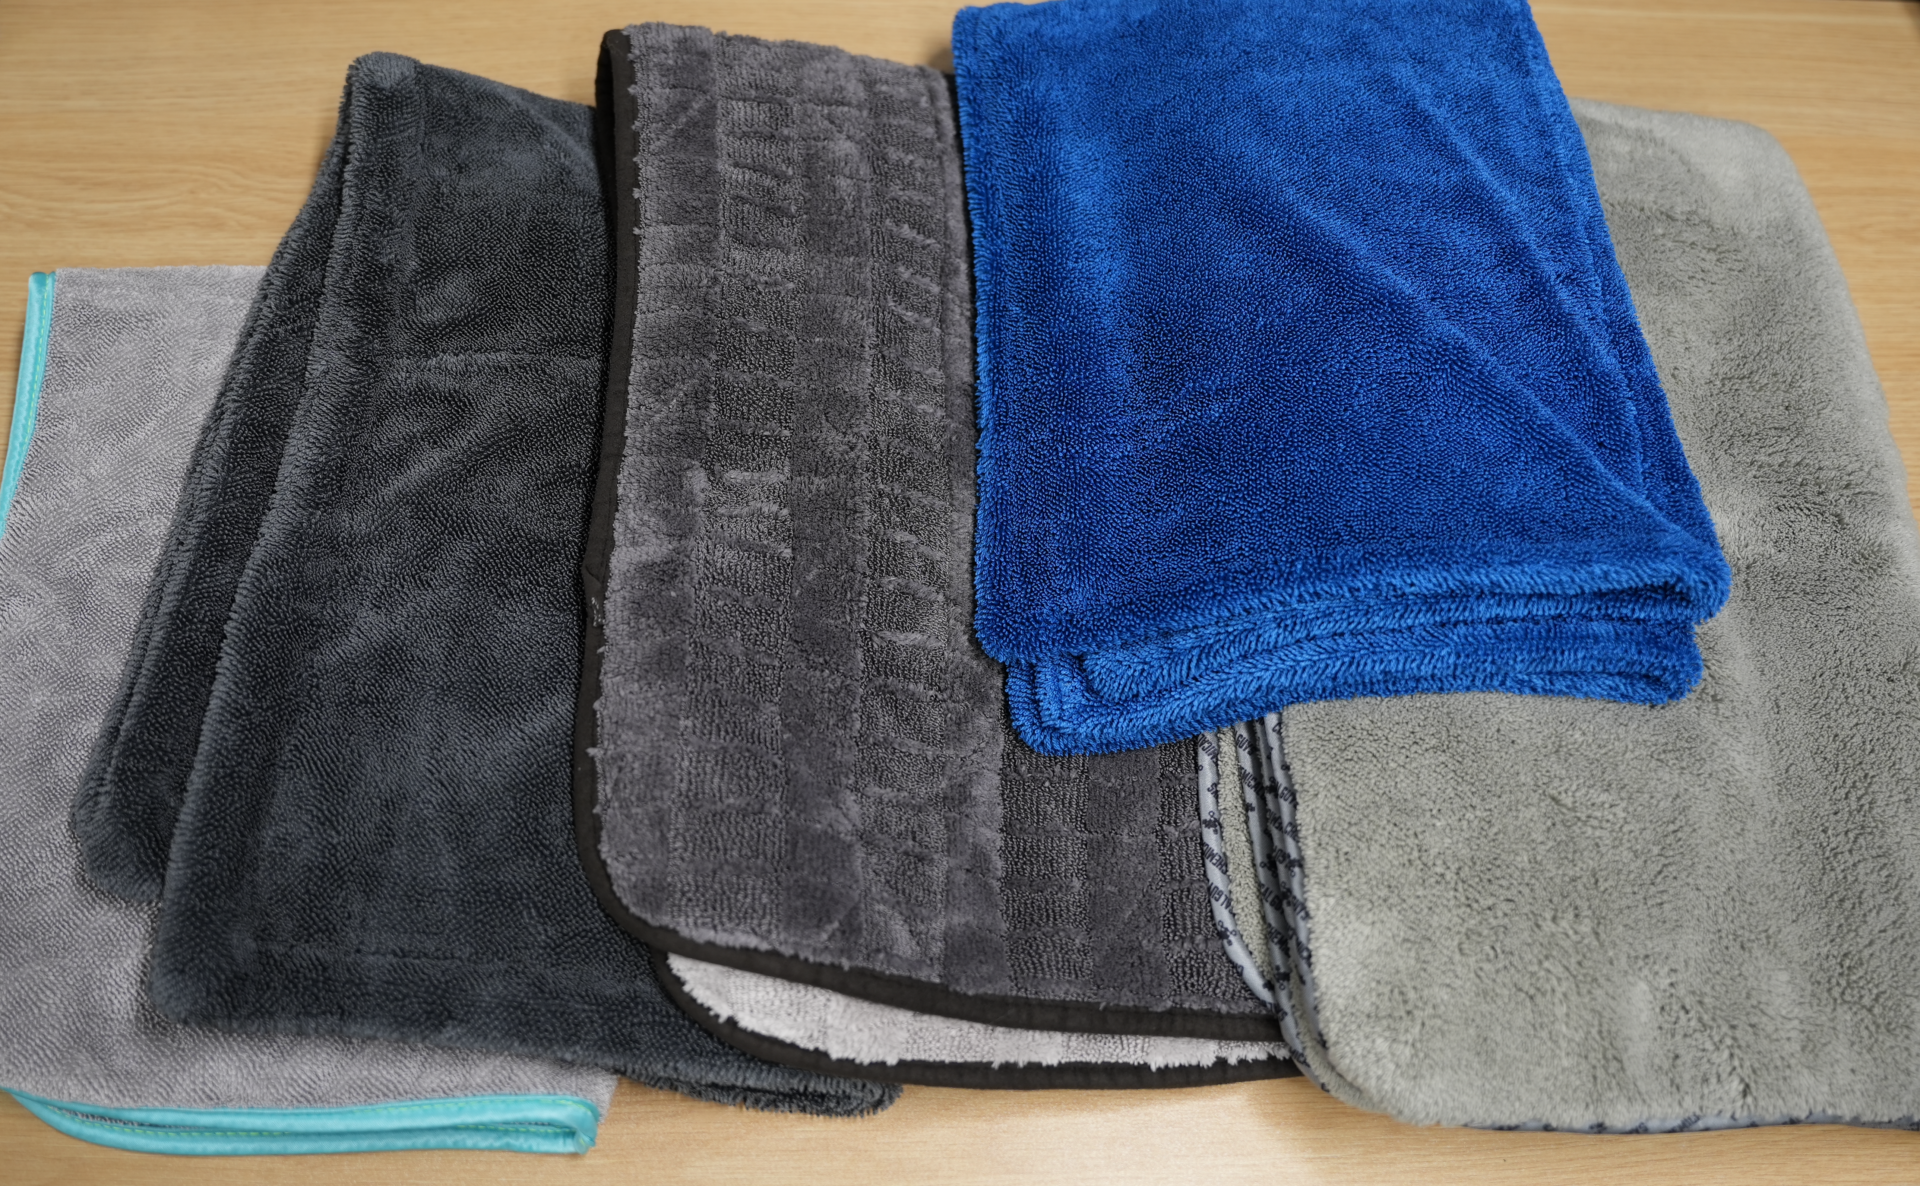 Experts agree: Even luxury towels need a test drive